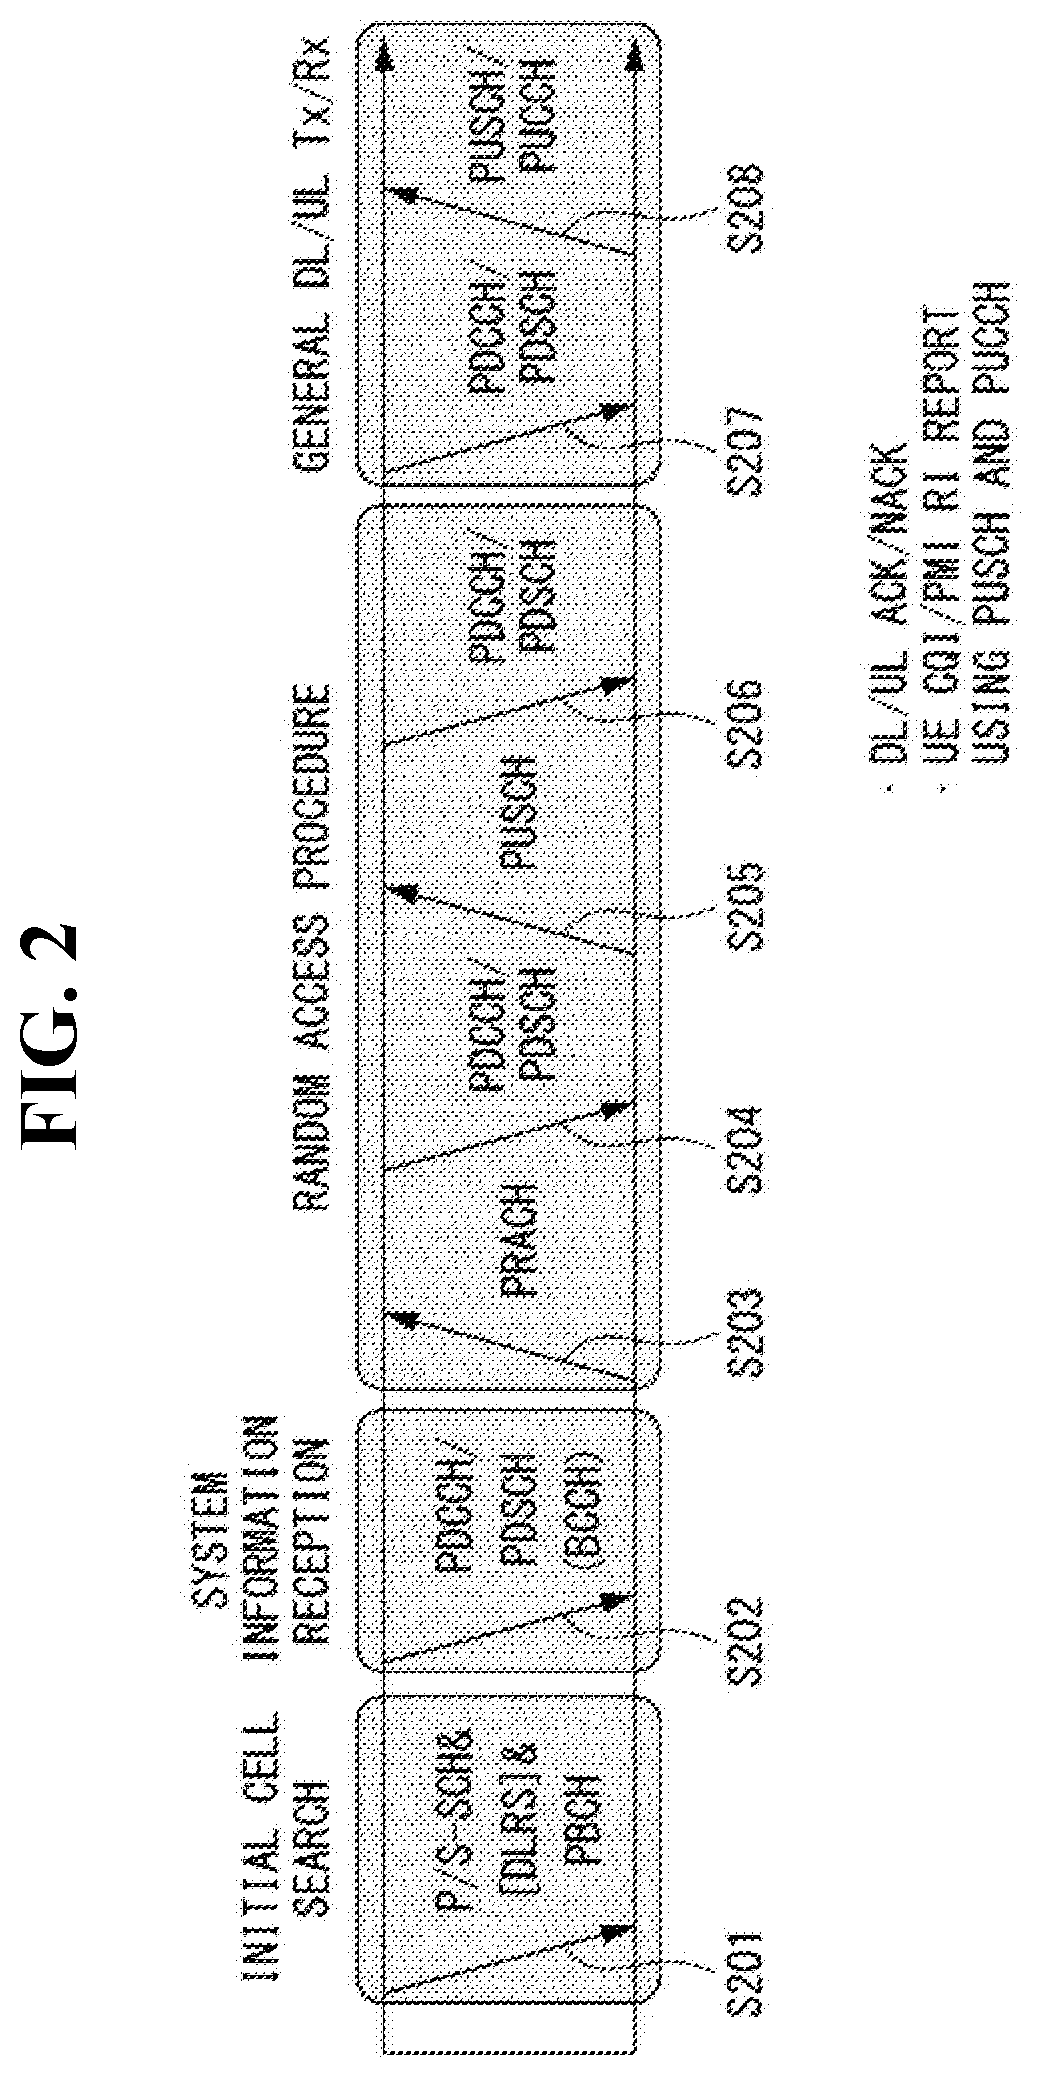 Vehicle device equipped with artificial intelligence, methods for collecting learning data and system for improving performance of artificial intelligence